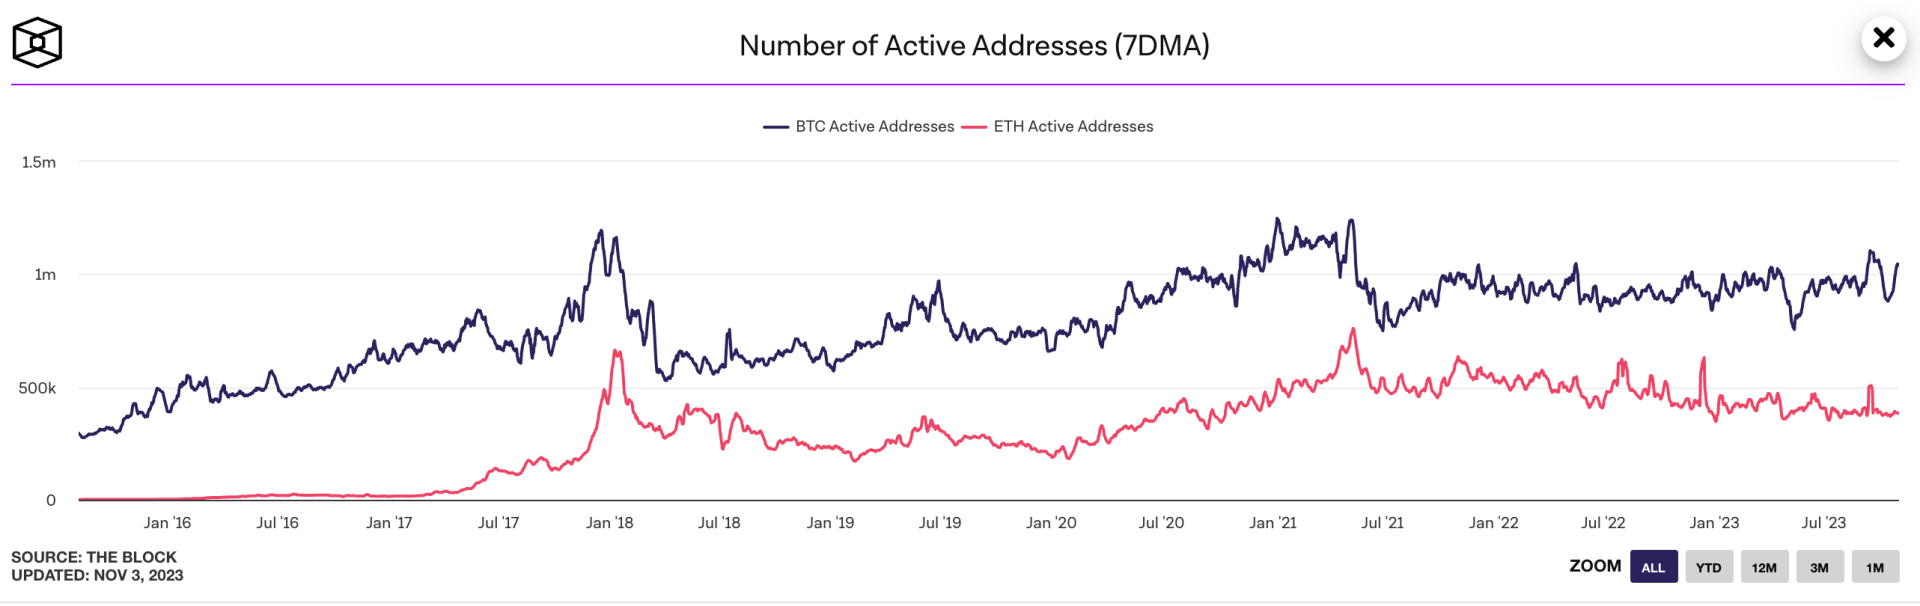 The number of active addresses on Ethereum has been stabilizing since the beginning of the year - November 3, 2023.